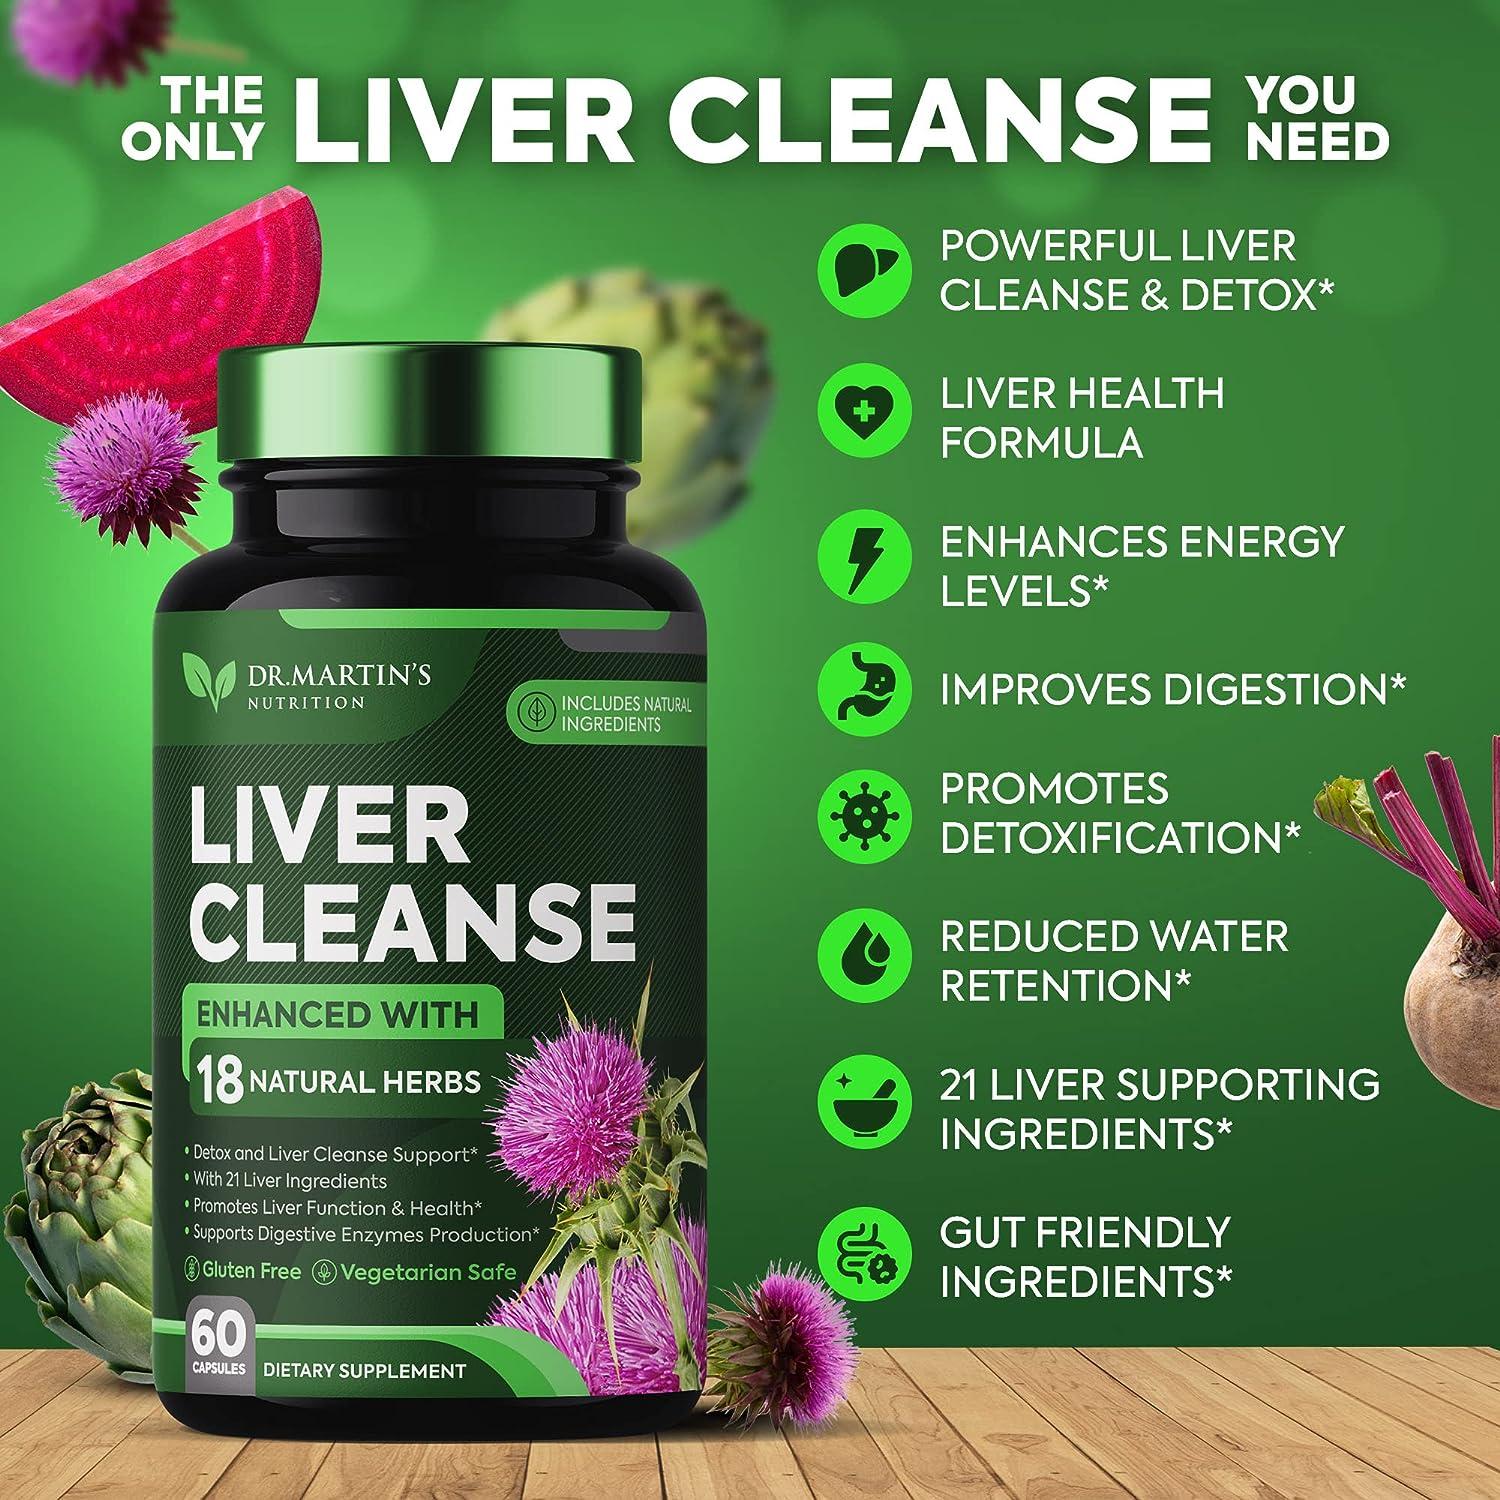 Liver cleanse for enhanced energy levels